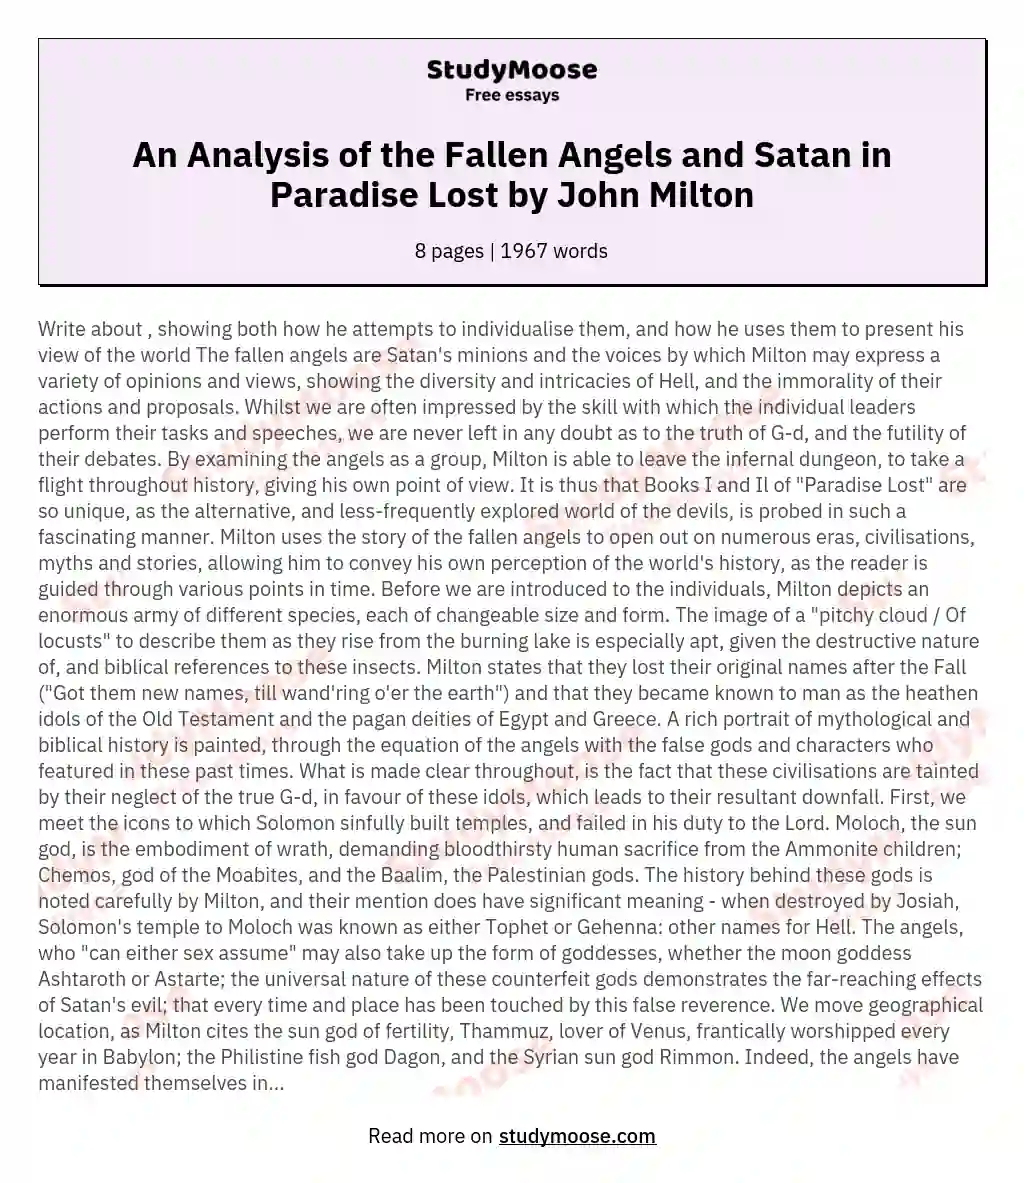 An Analysis of the Fallen Angels and Satan in Paradise Lost by John Milton essay